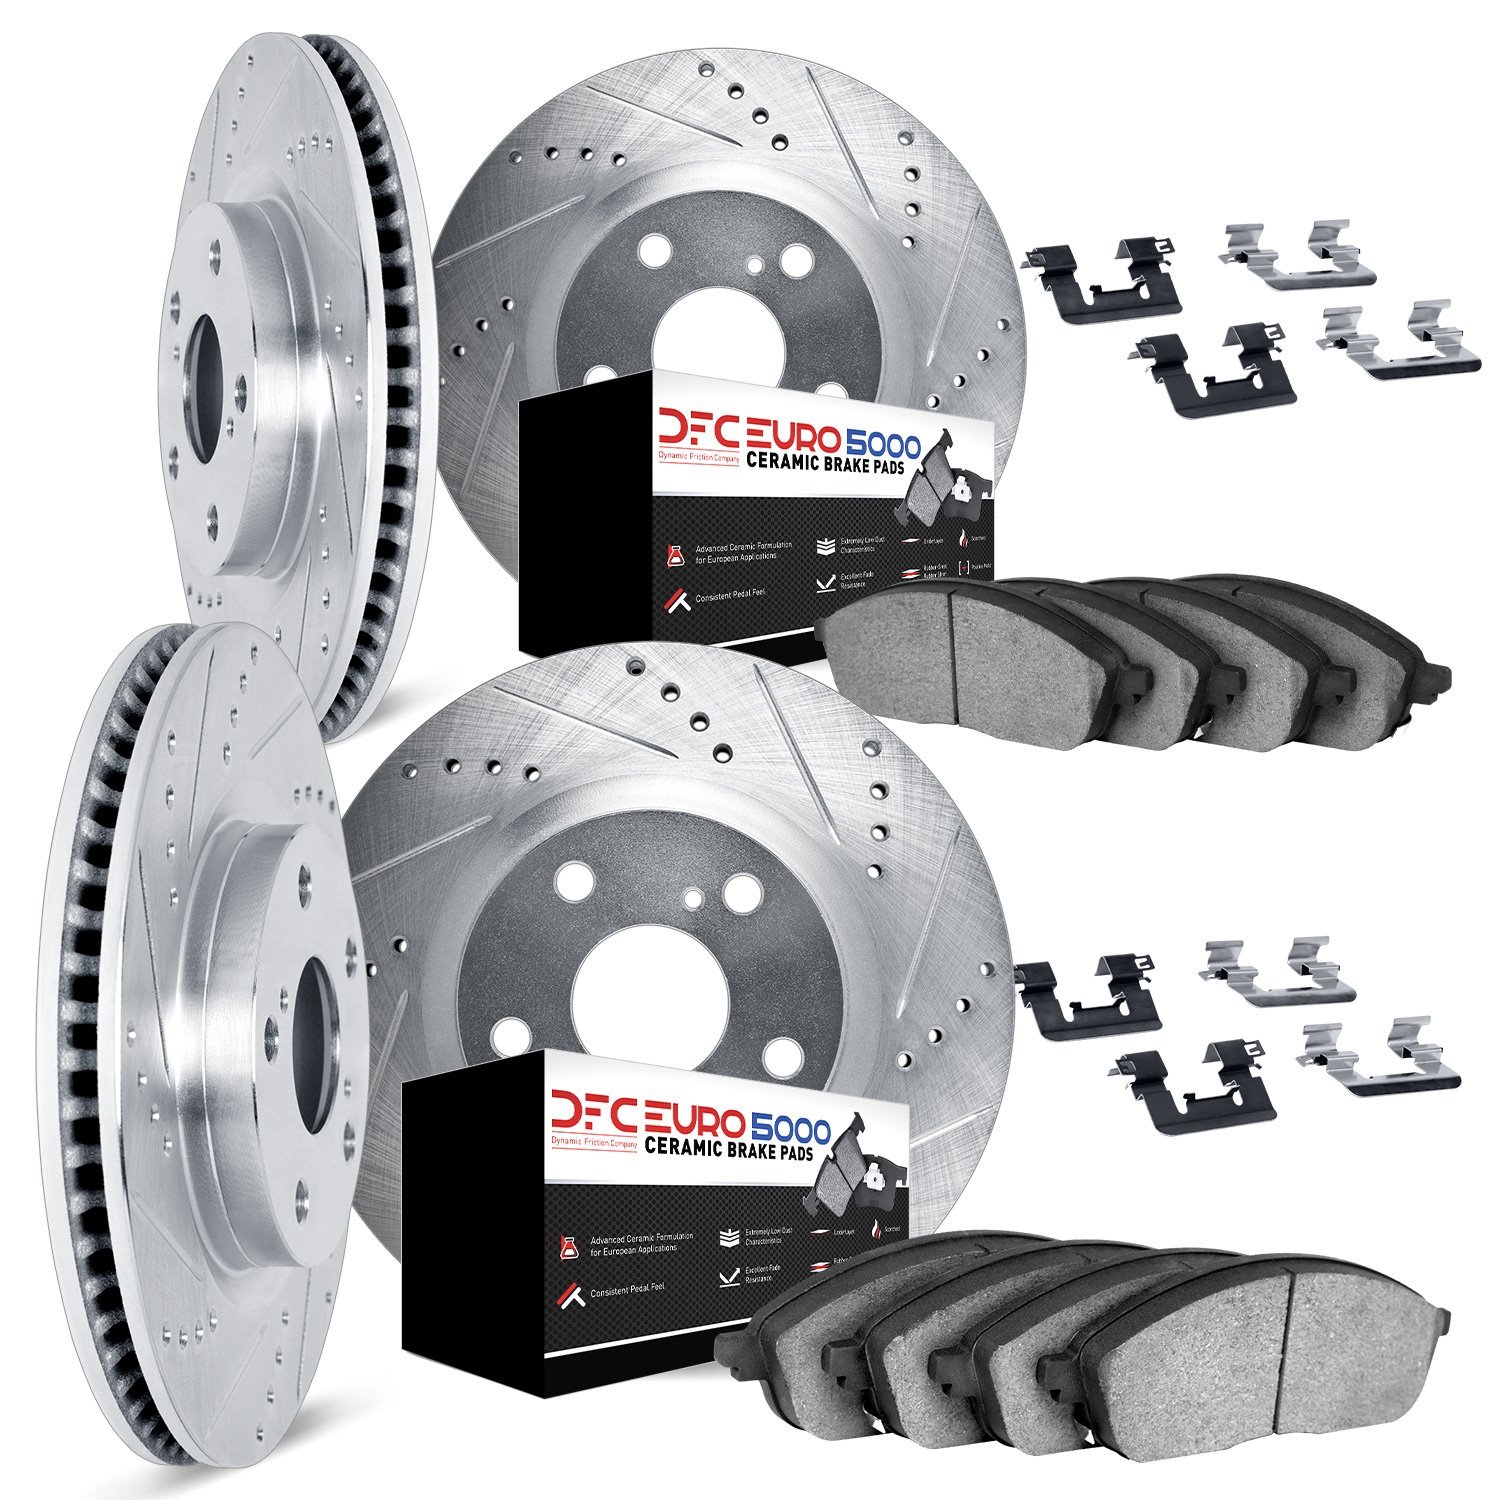 7614-31019 Drilled/Slotted Brake Rotors w/5000 Euro Ceramic Brake Pads Kit & Hardware [Silver], 2006-2008 BMW, Position: Front a